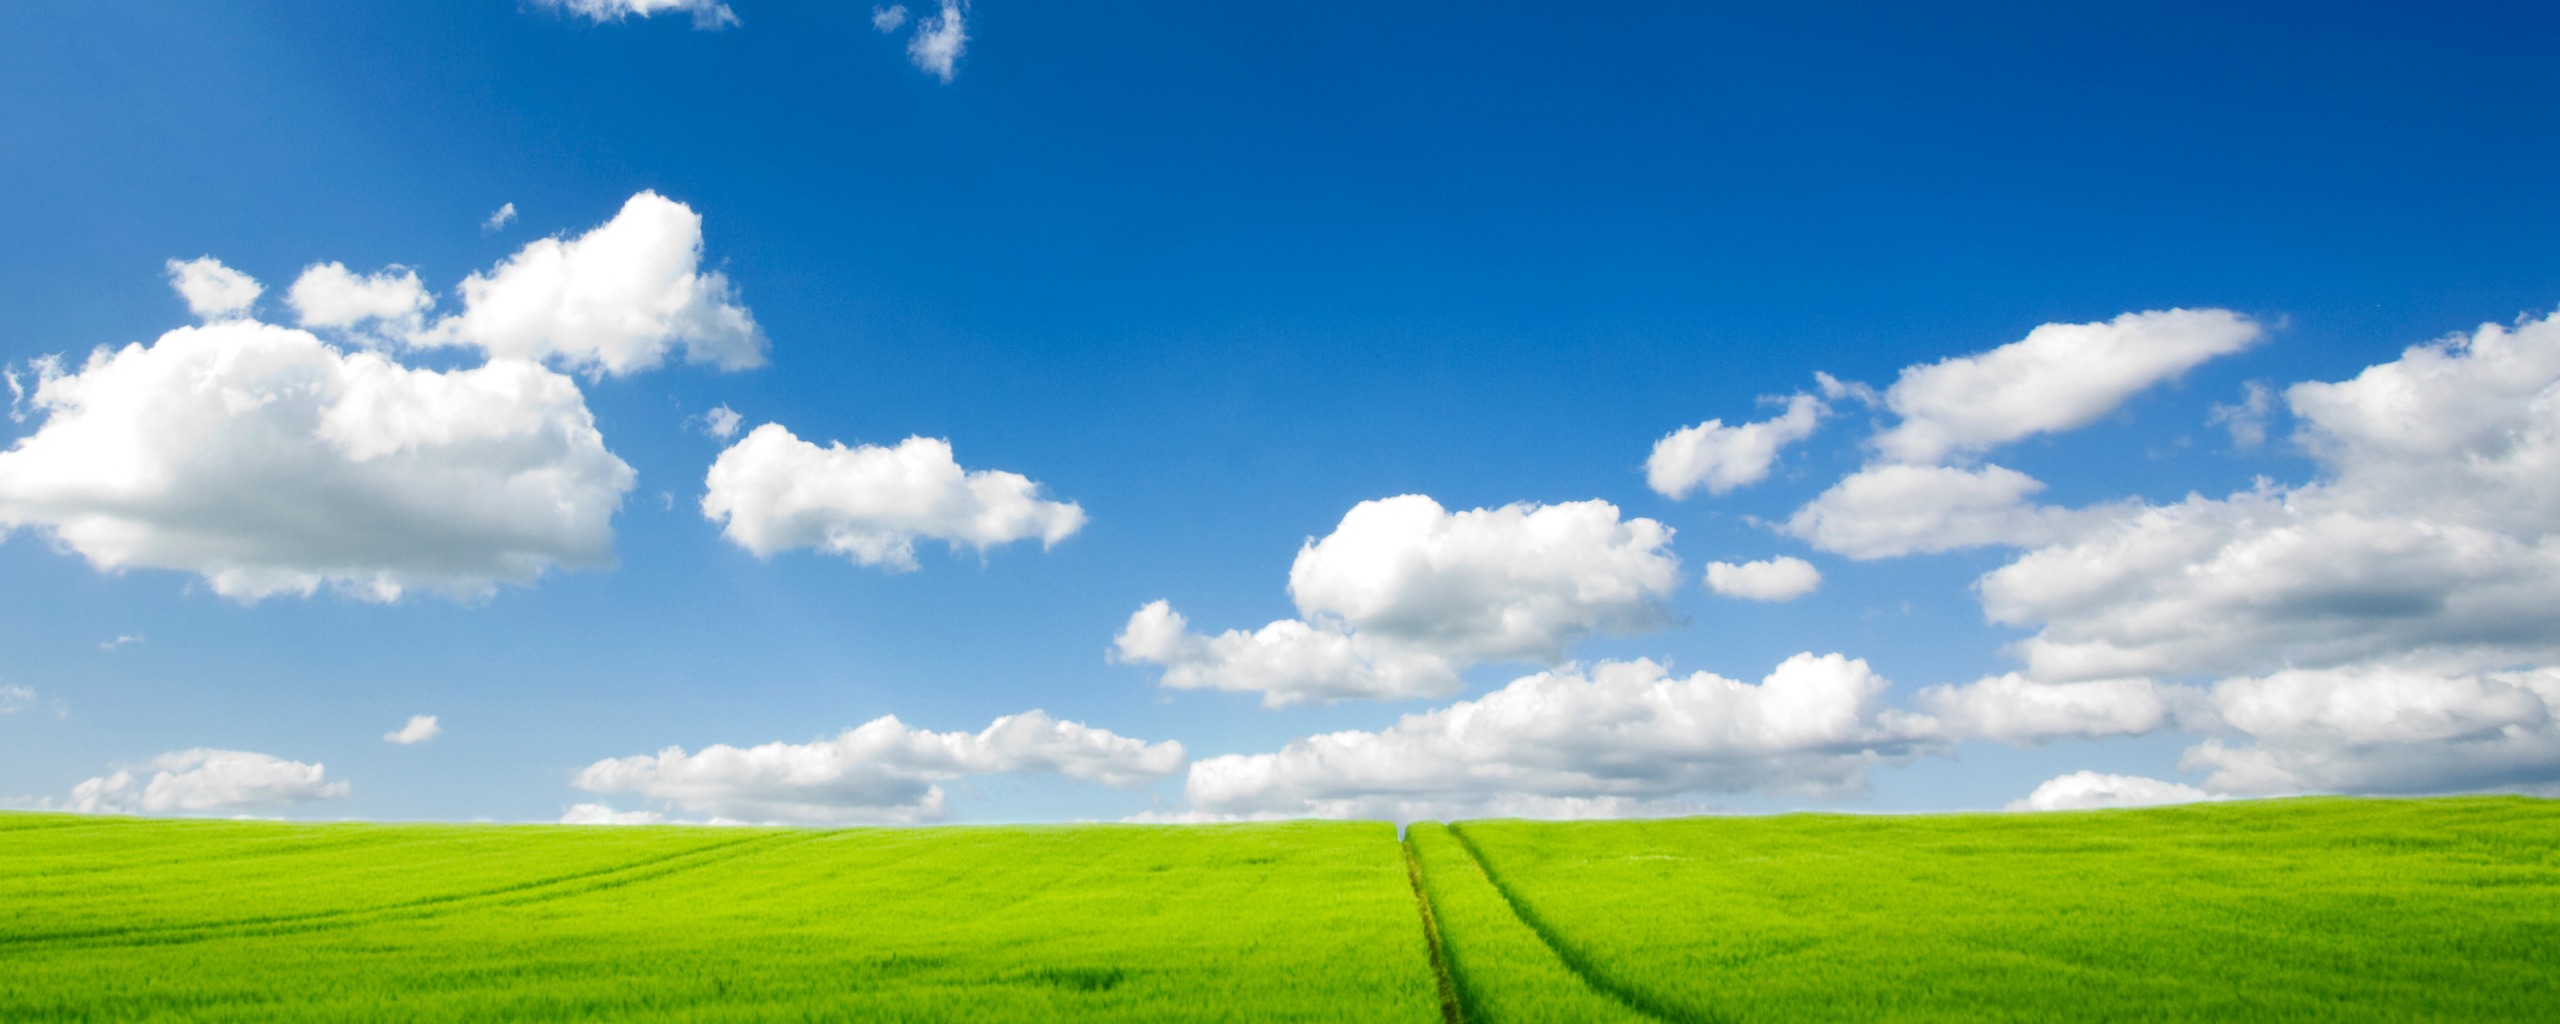 Wallpaper Of The Pure Natural Scenery: Vast Grassland | Free ...